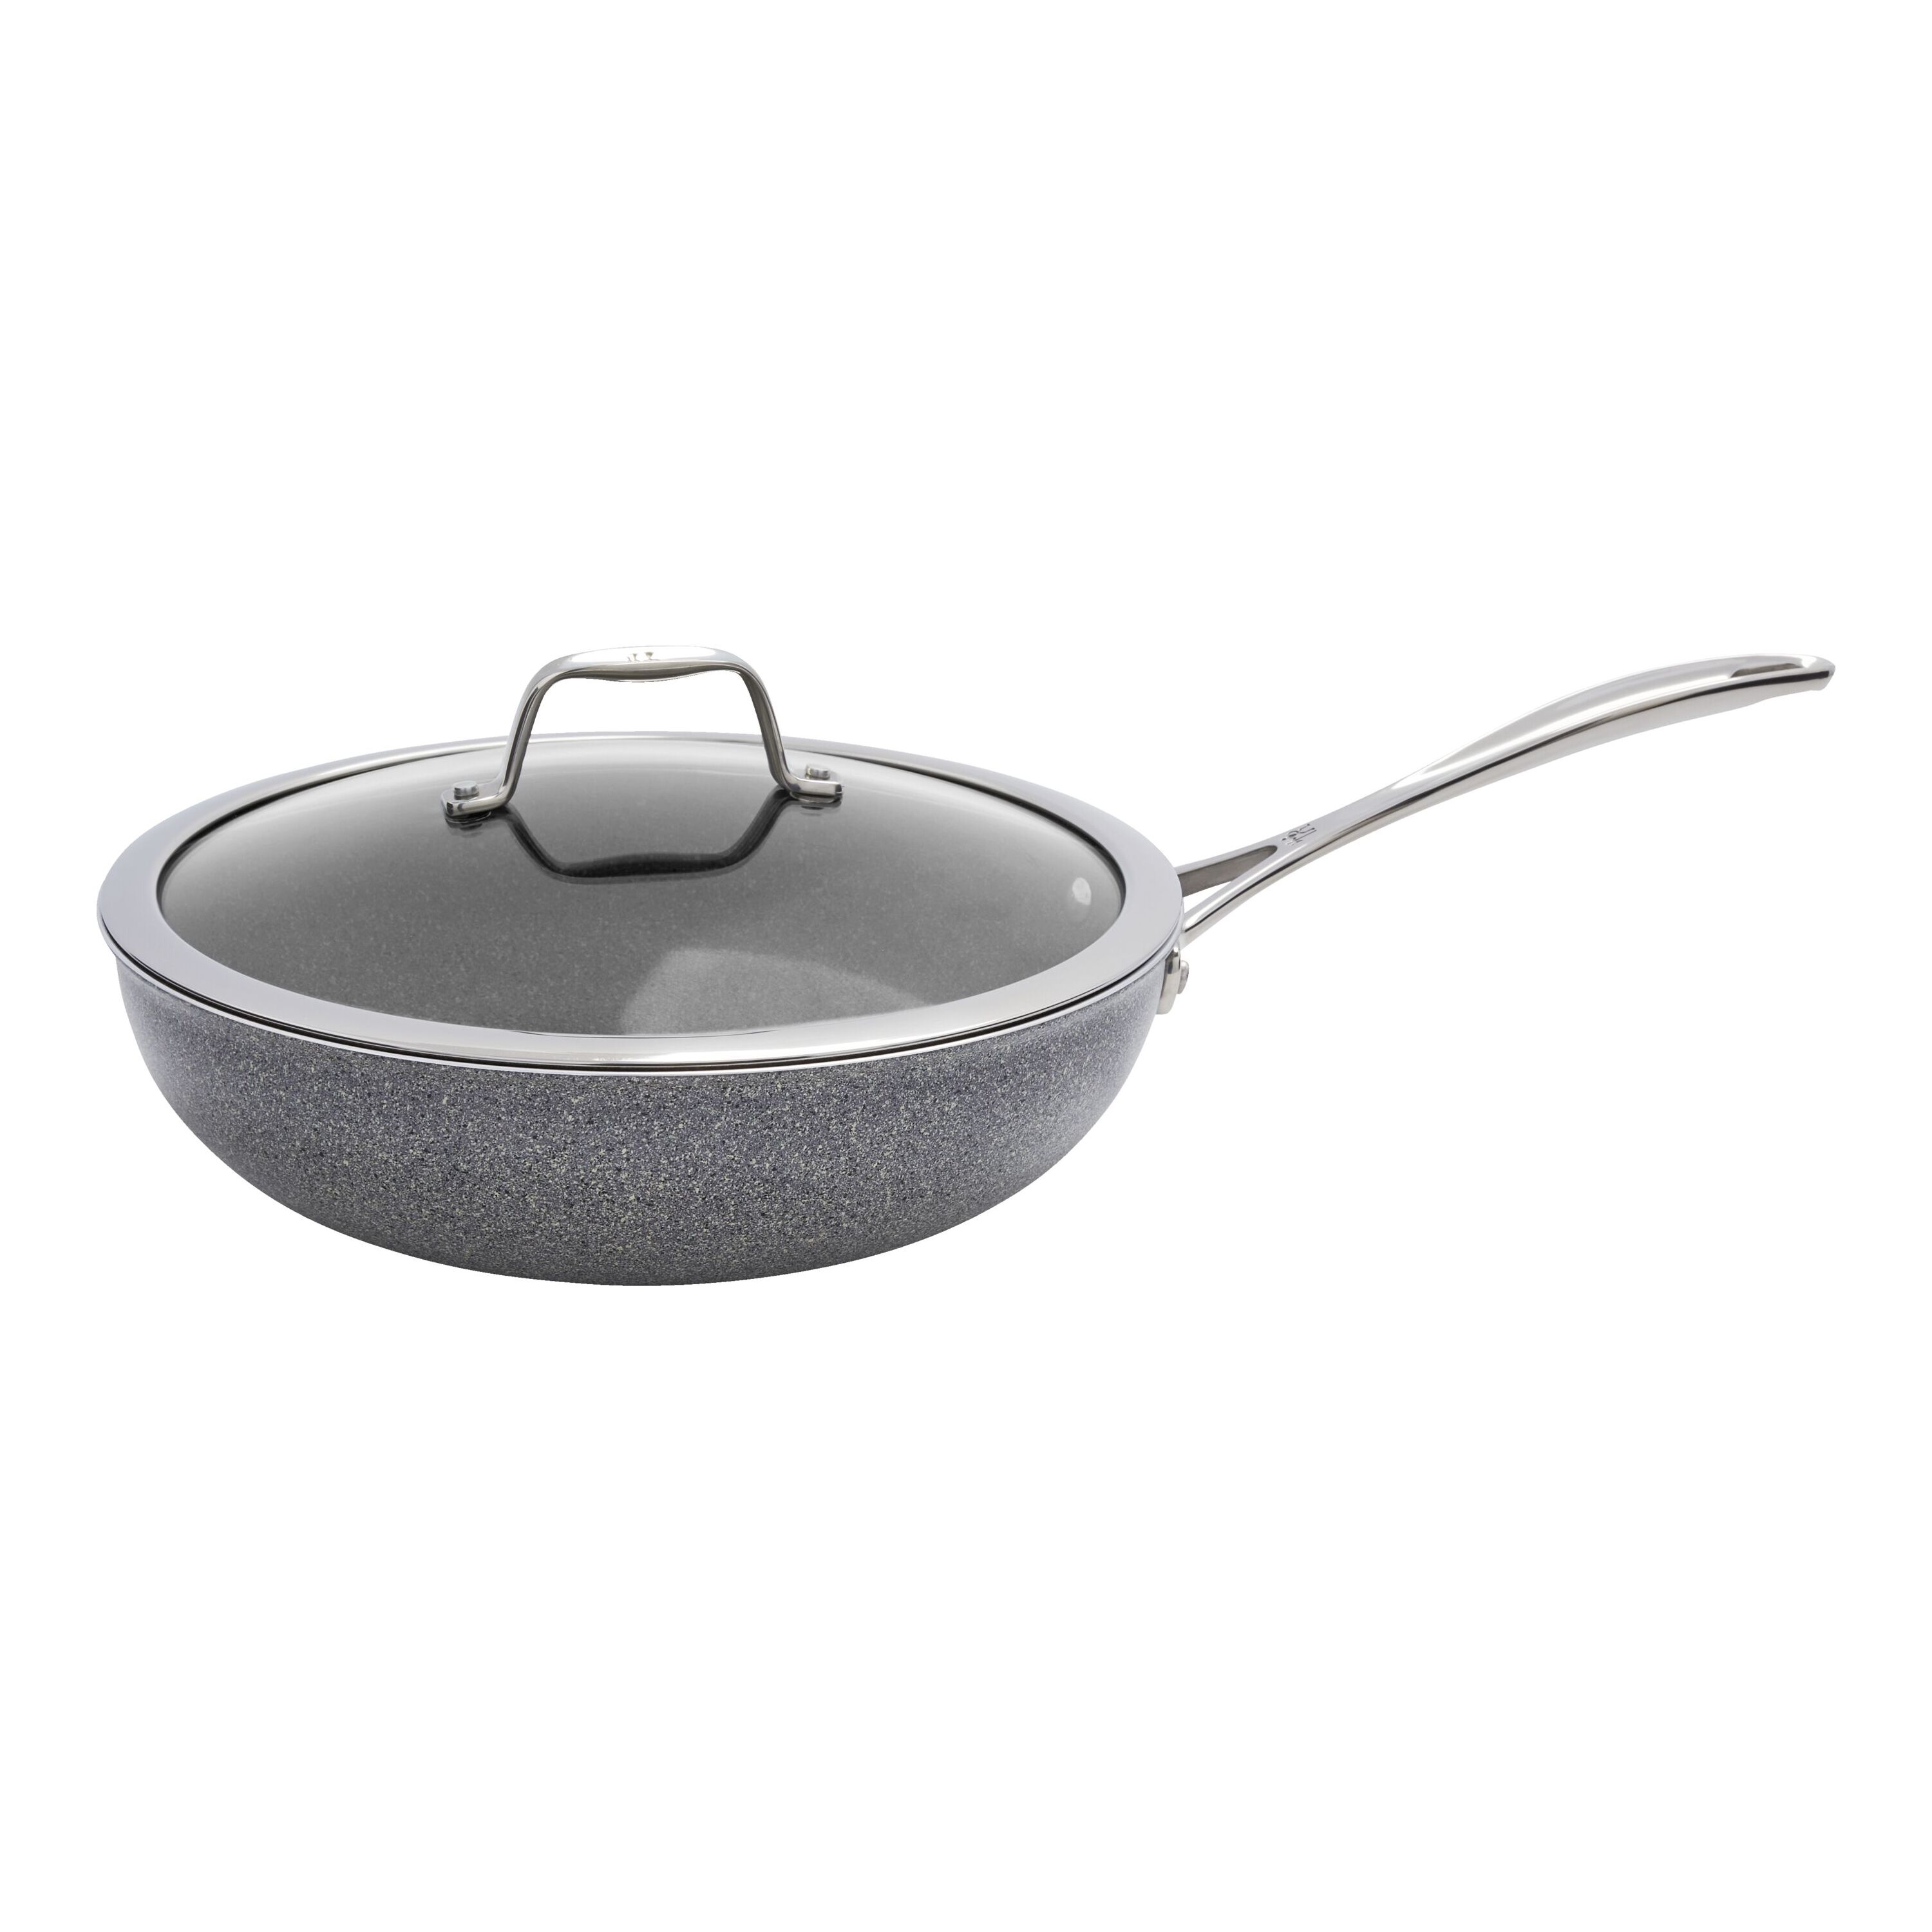 Zwilling J.A. Henckels - 11 Commercial Non-Stick Frying Pan